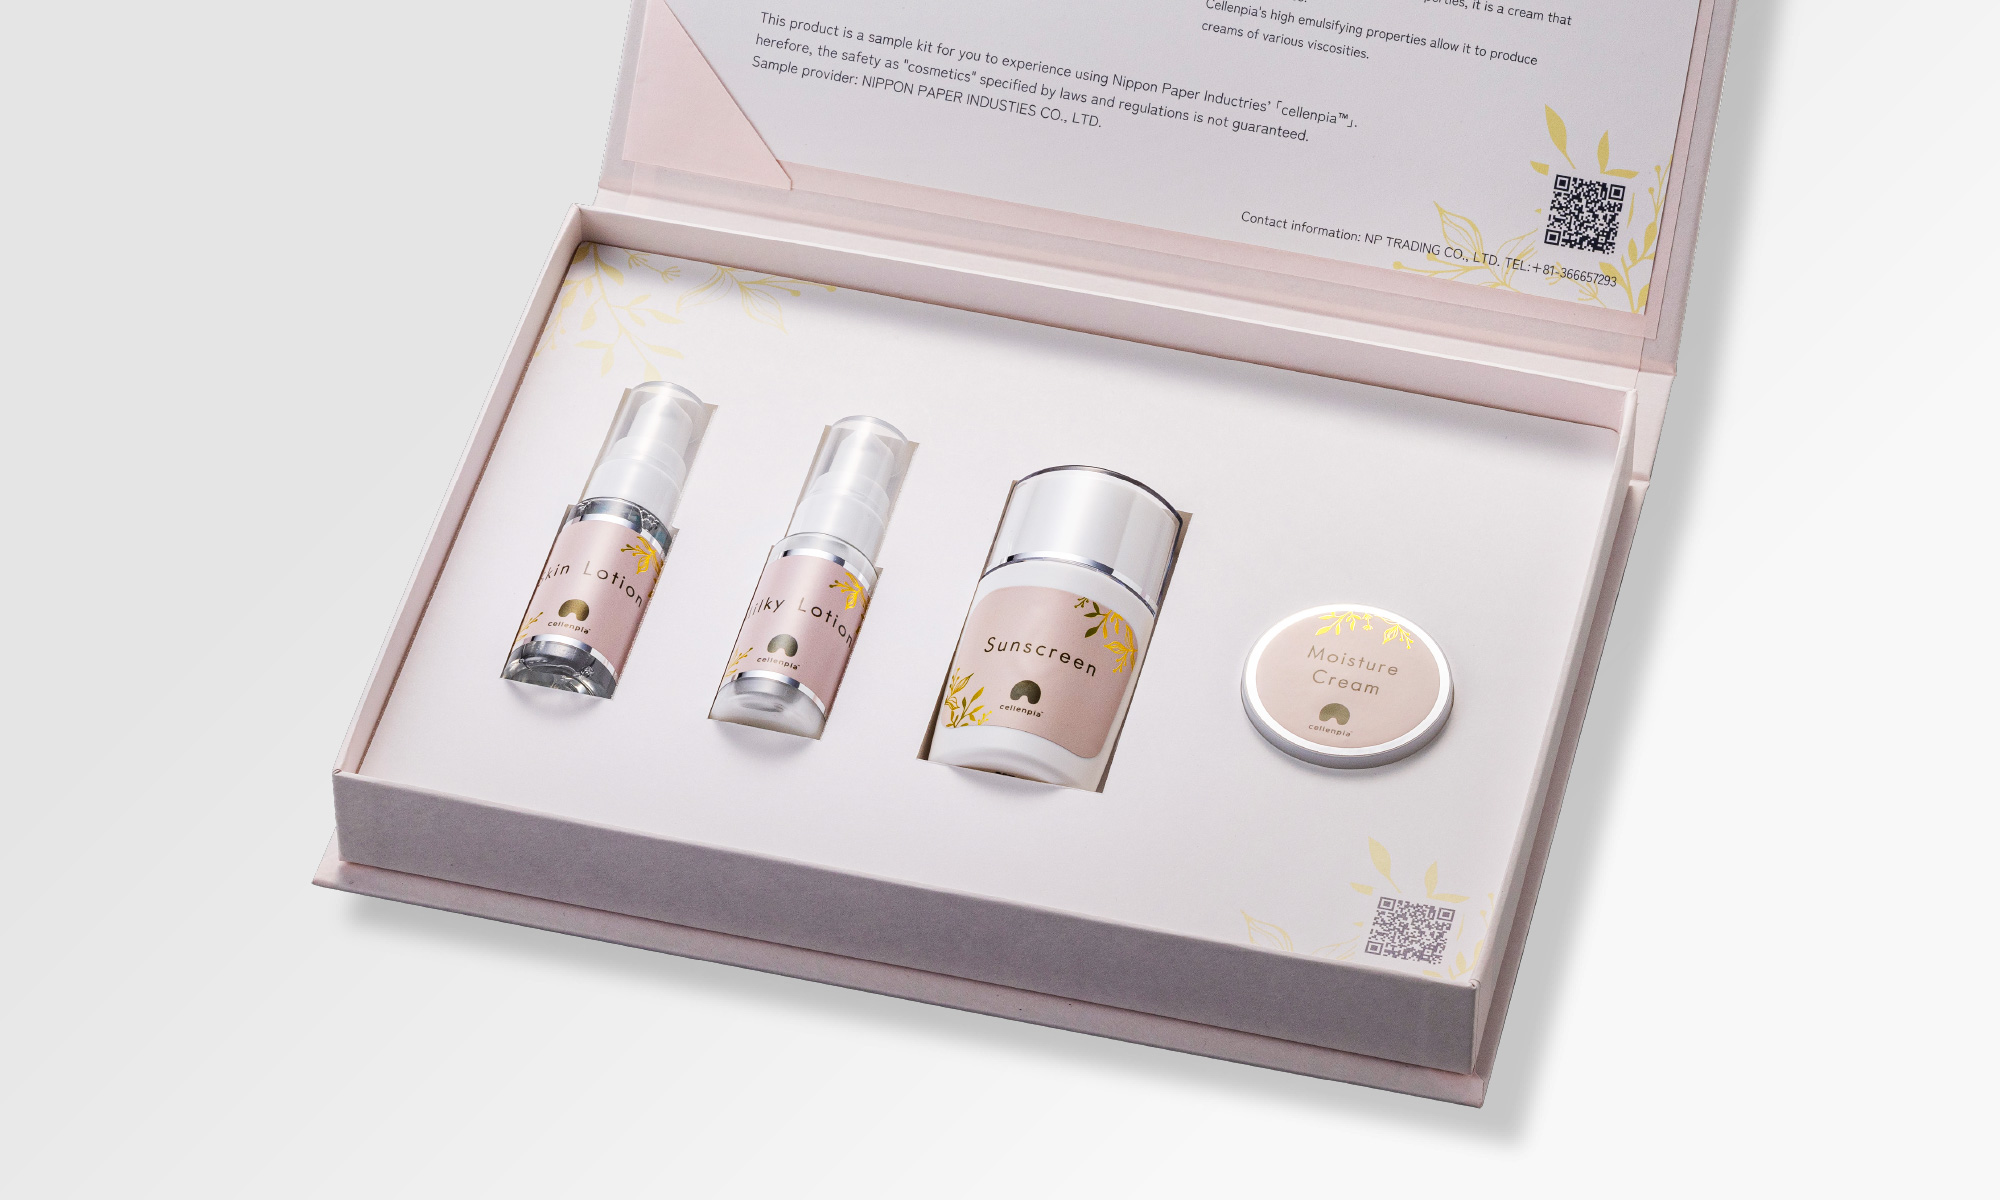 cellenpia | Sample products